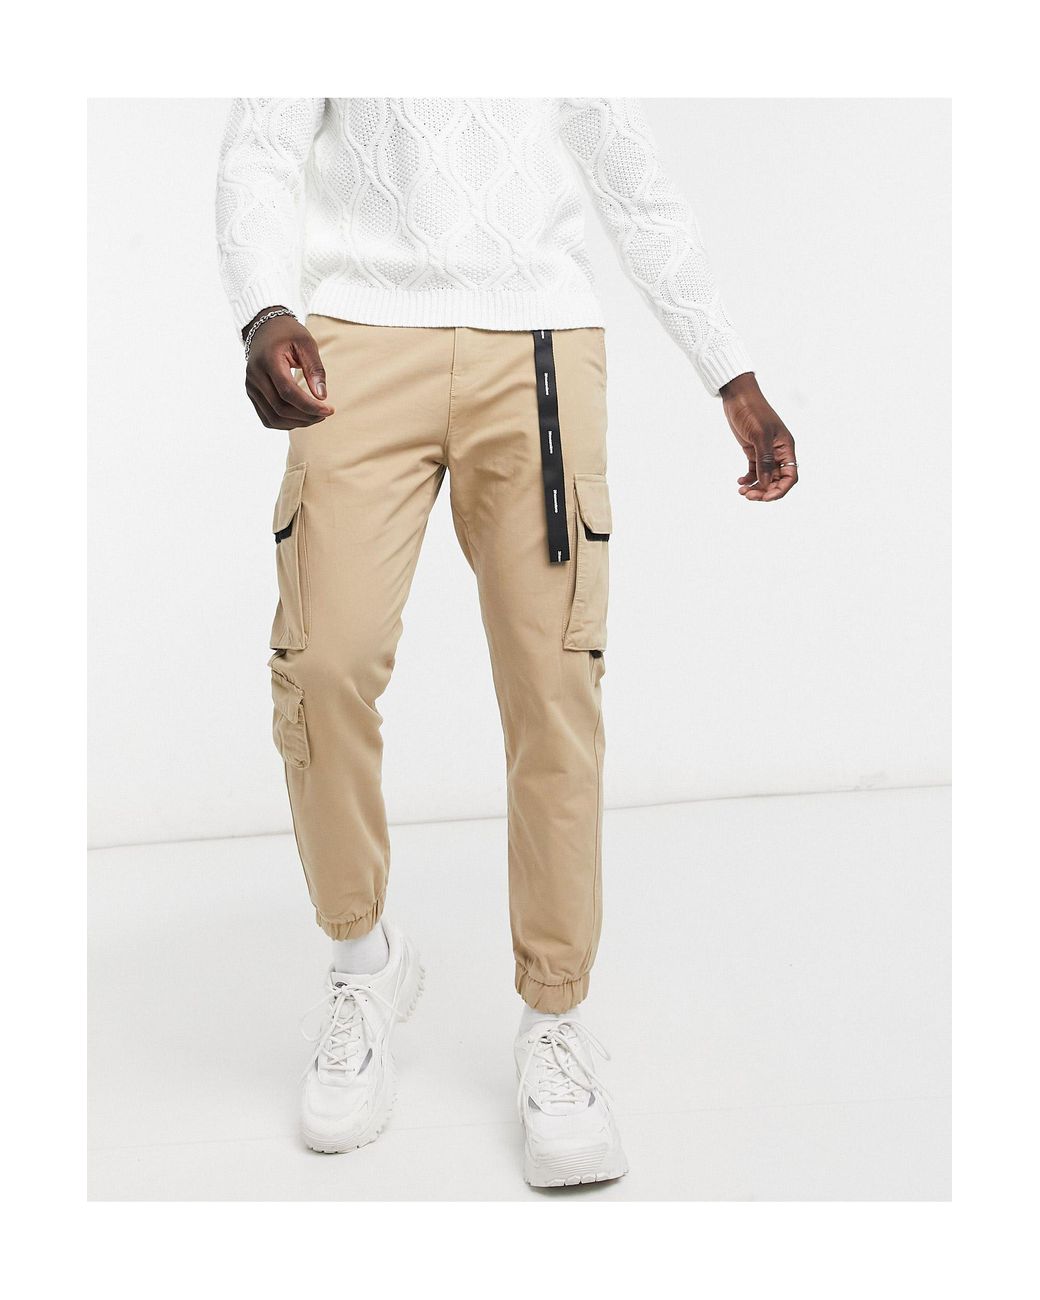 Bershka Denim Cargo Trousers With Key Chain in Natural for Men - Save 34% |  Lyst